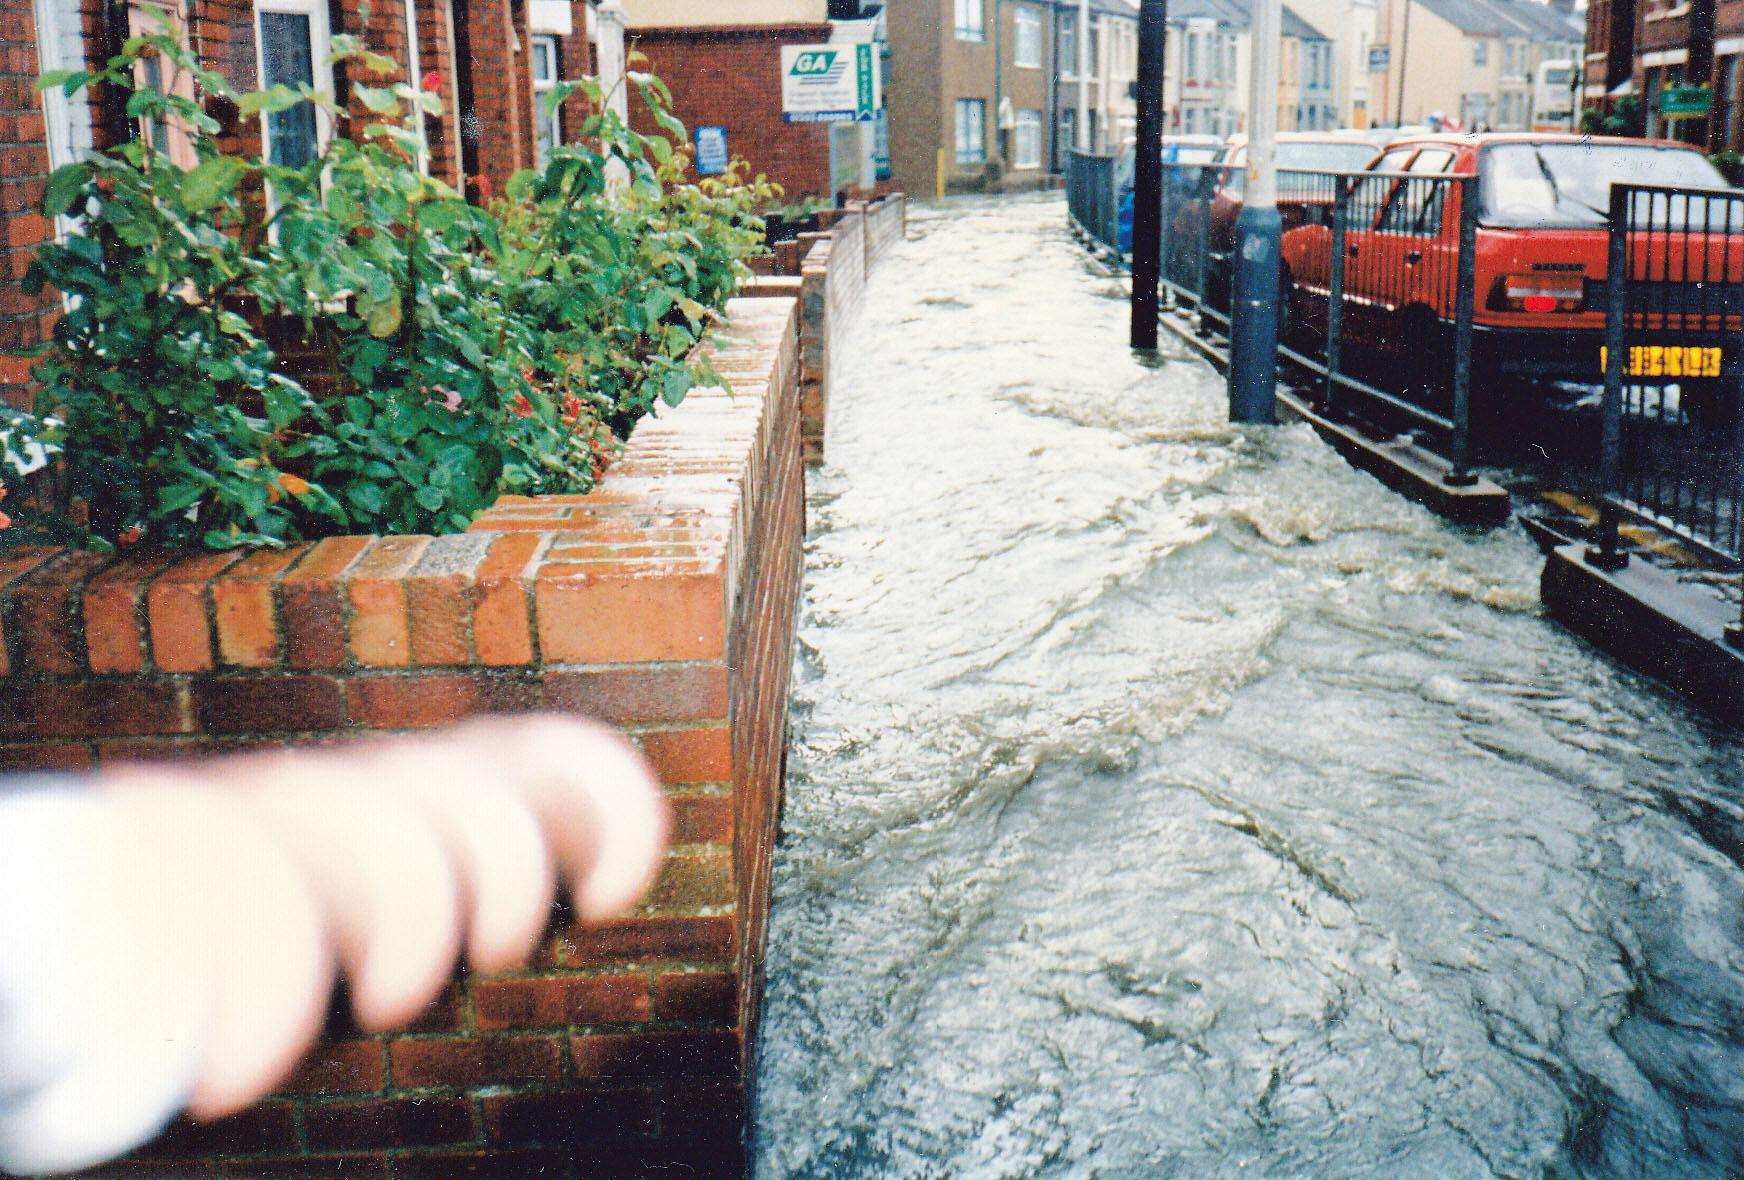 Water gushing down the Pavilion Road path. Picture by Pam Dray in the book Folkestone and District Through Time, Amberley Publishing